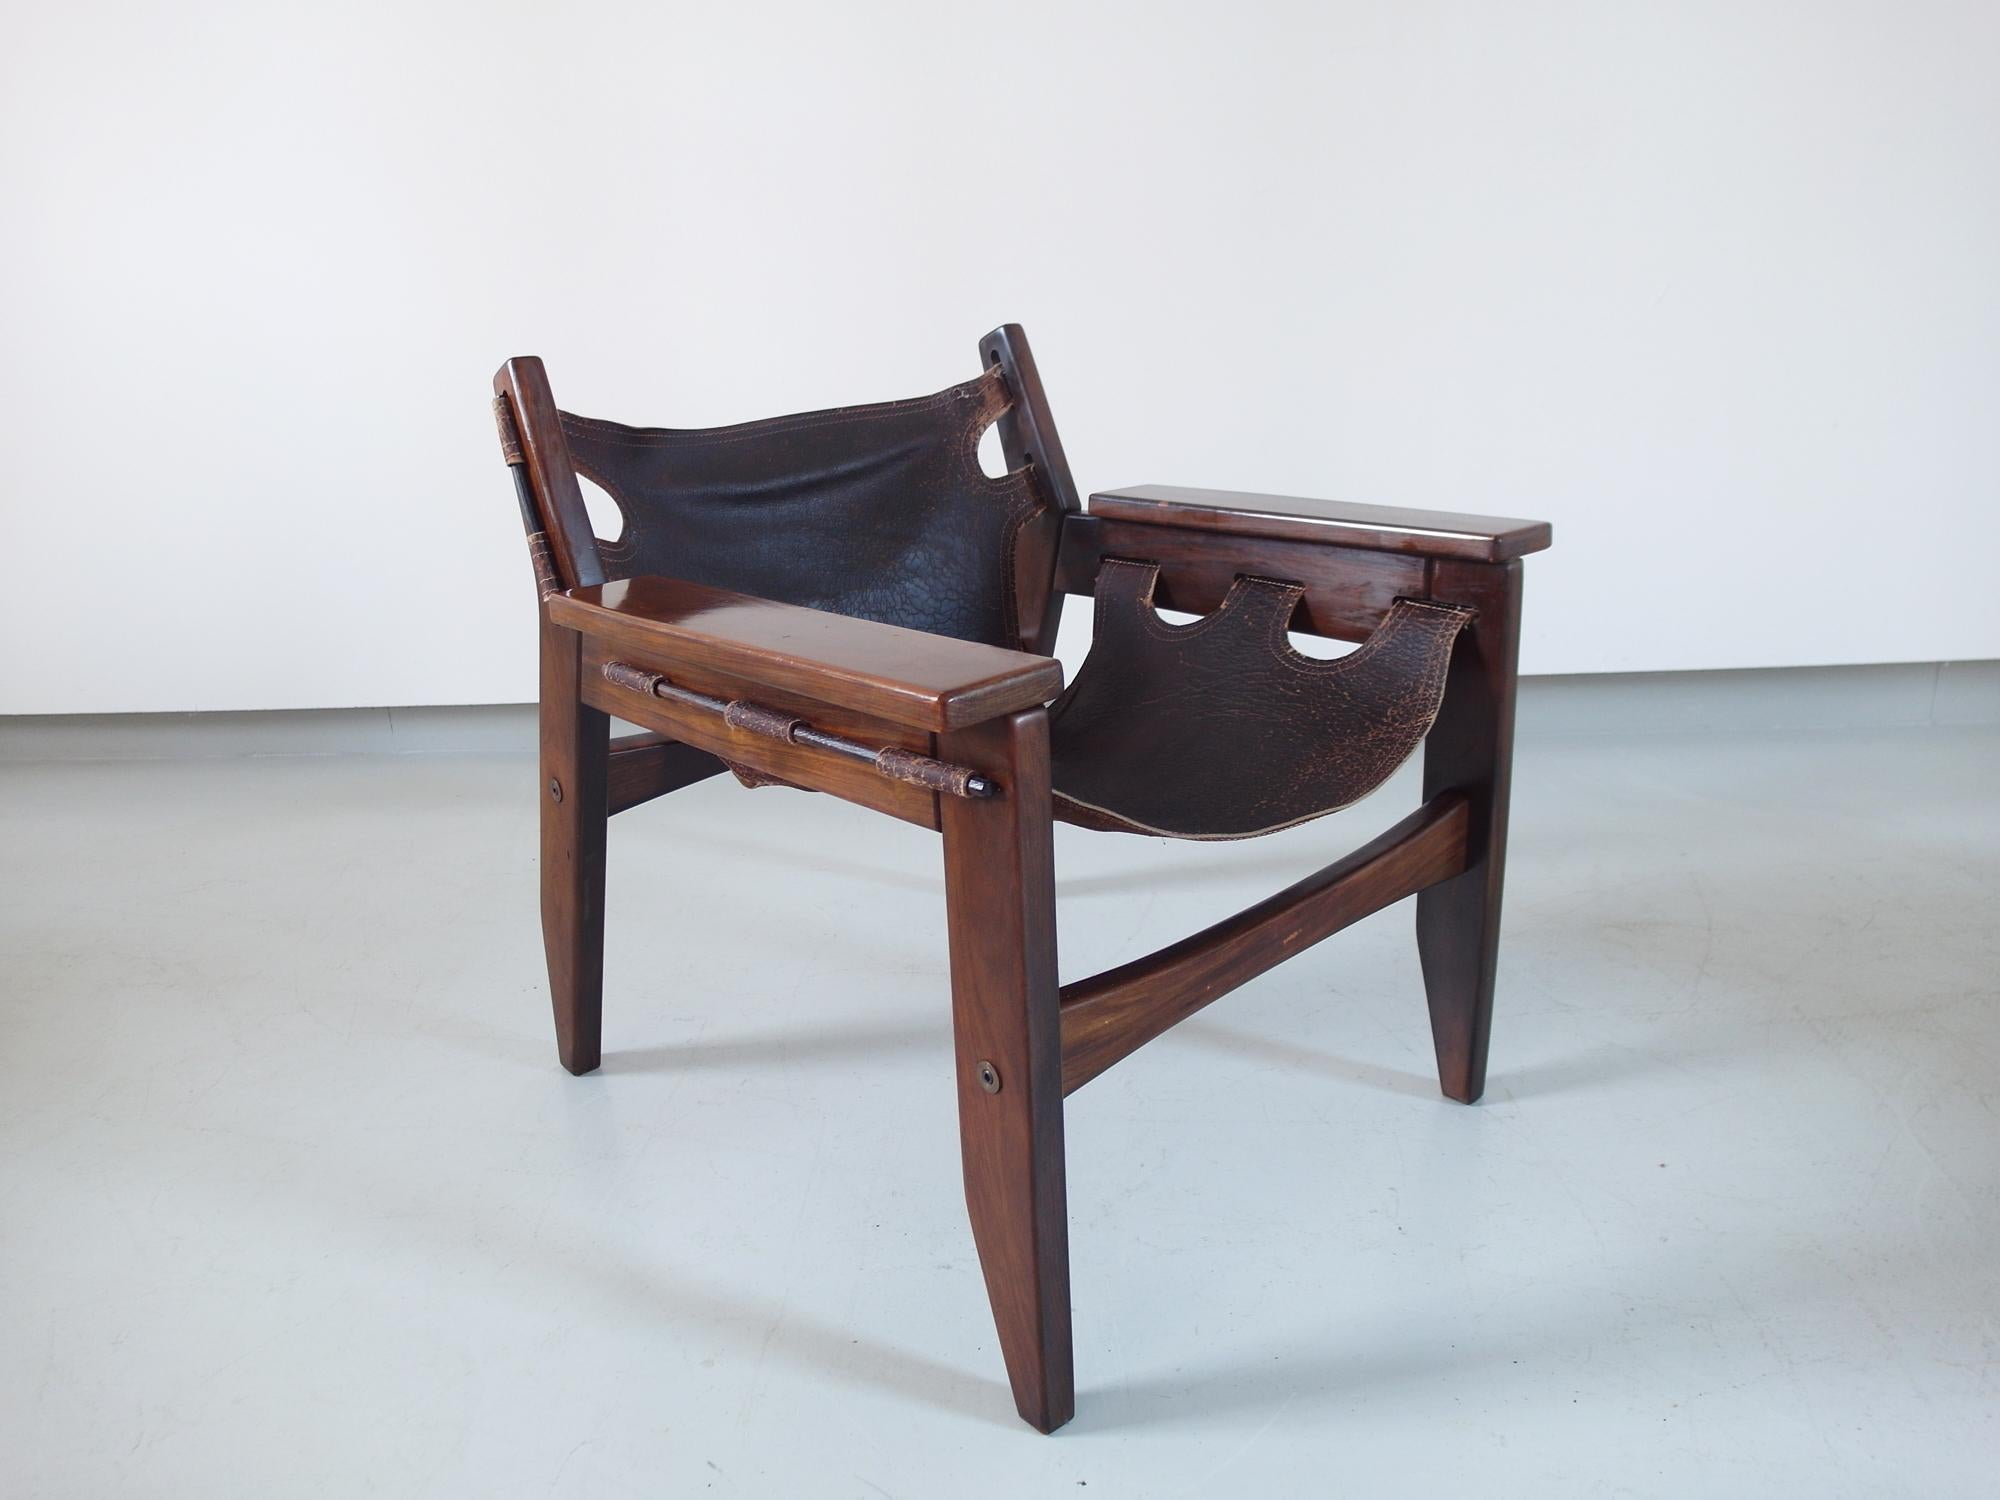 Pair of Sergio Rodrigues Kilin Lounge Chairs for Oca, Brazil, 1973 For Sale 3